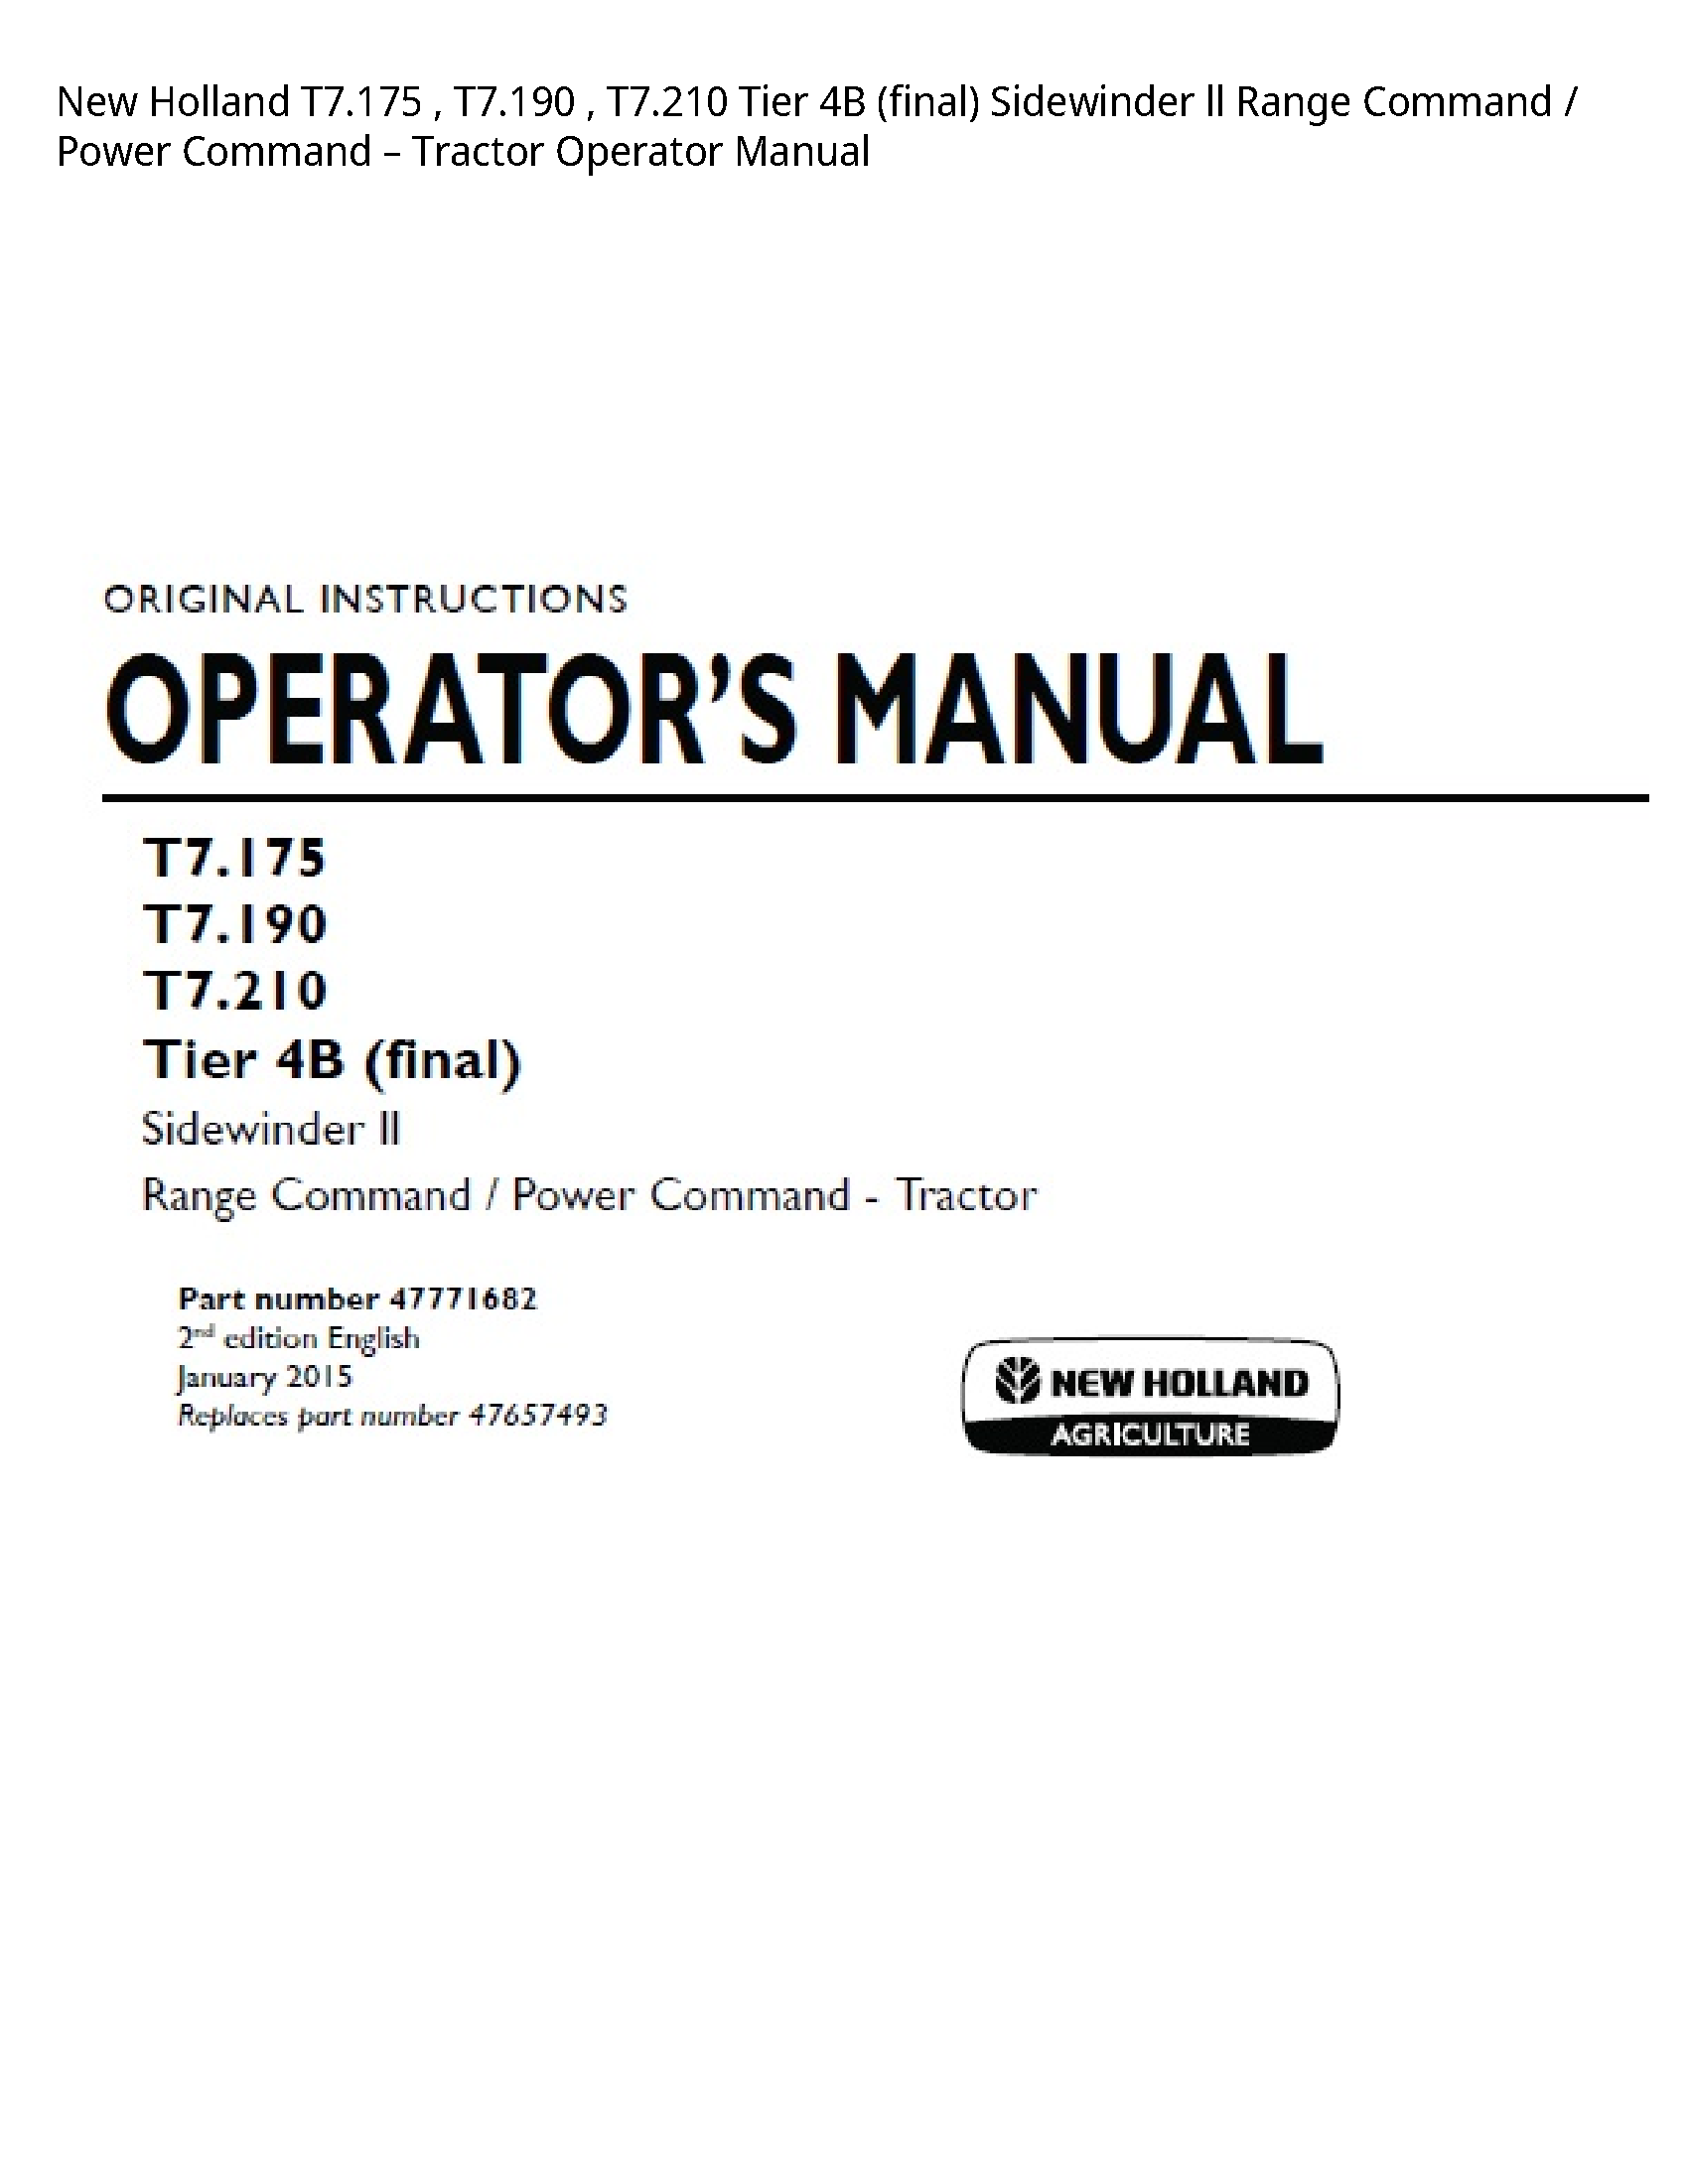 New Holland T7.175 Tier (final) Sidewinder ll Range Command Power Command Tractor Operator manual